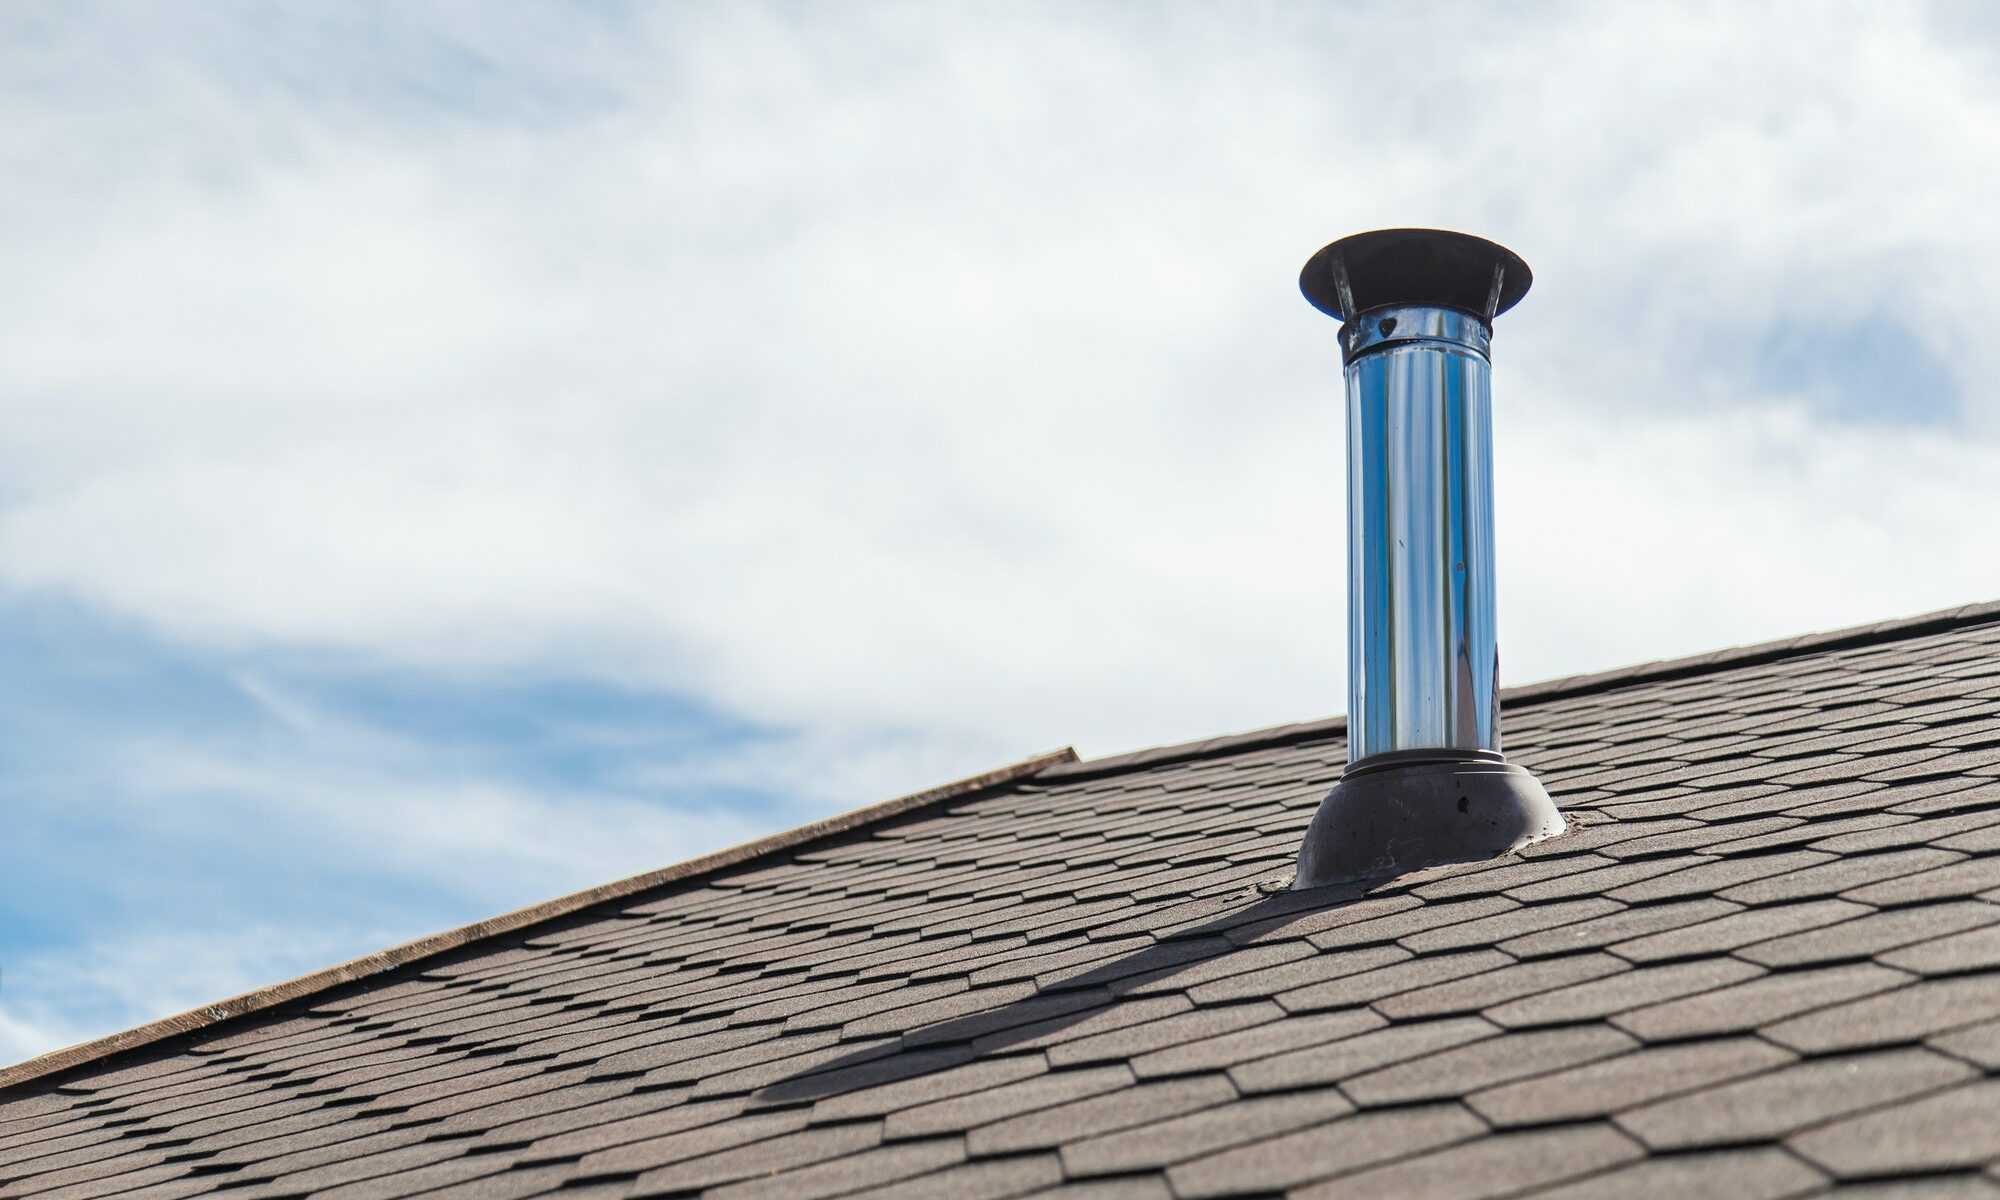 Chimney pipe from stainless steel on the roof of the house